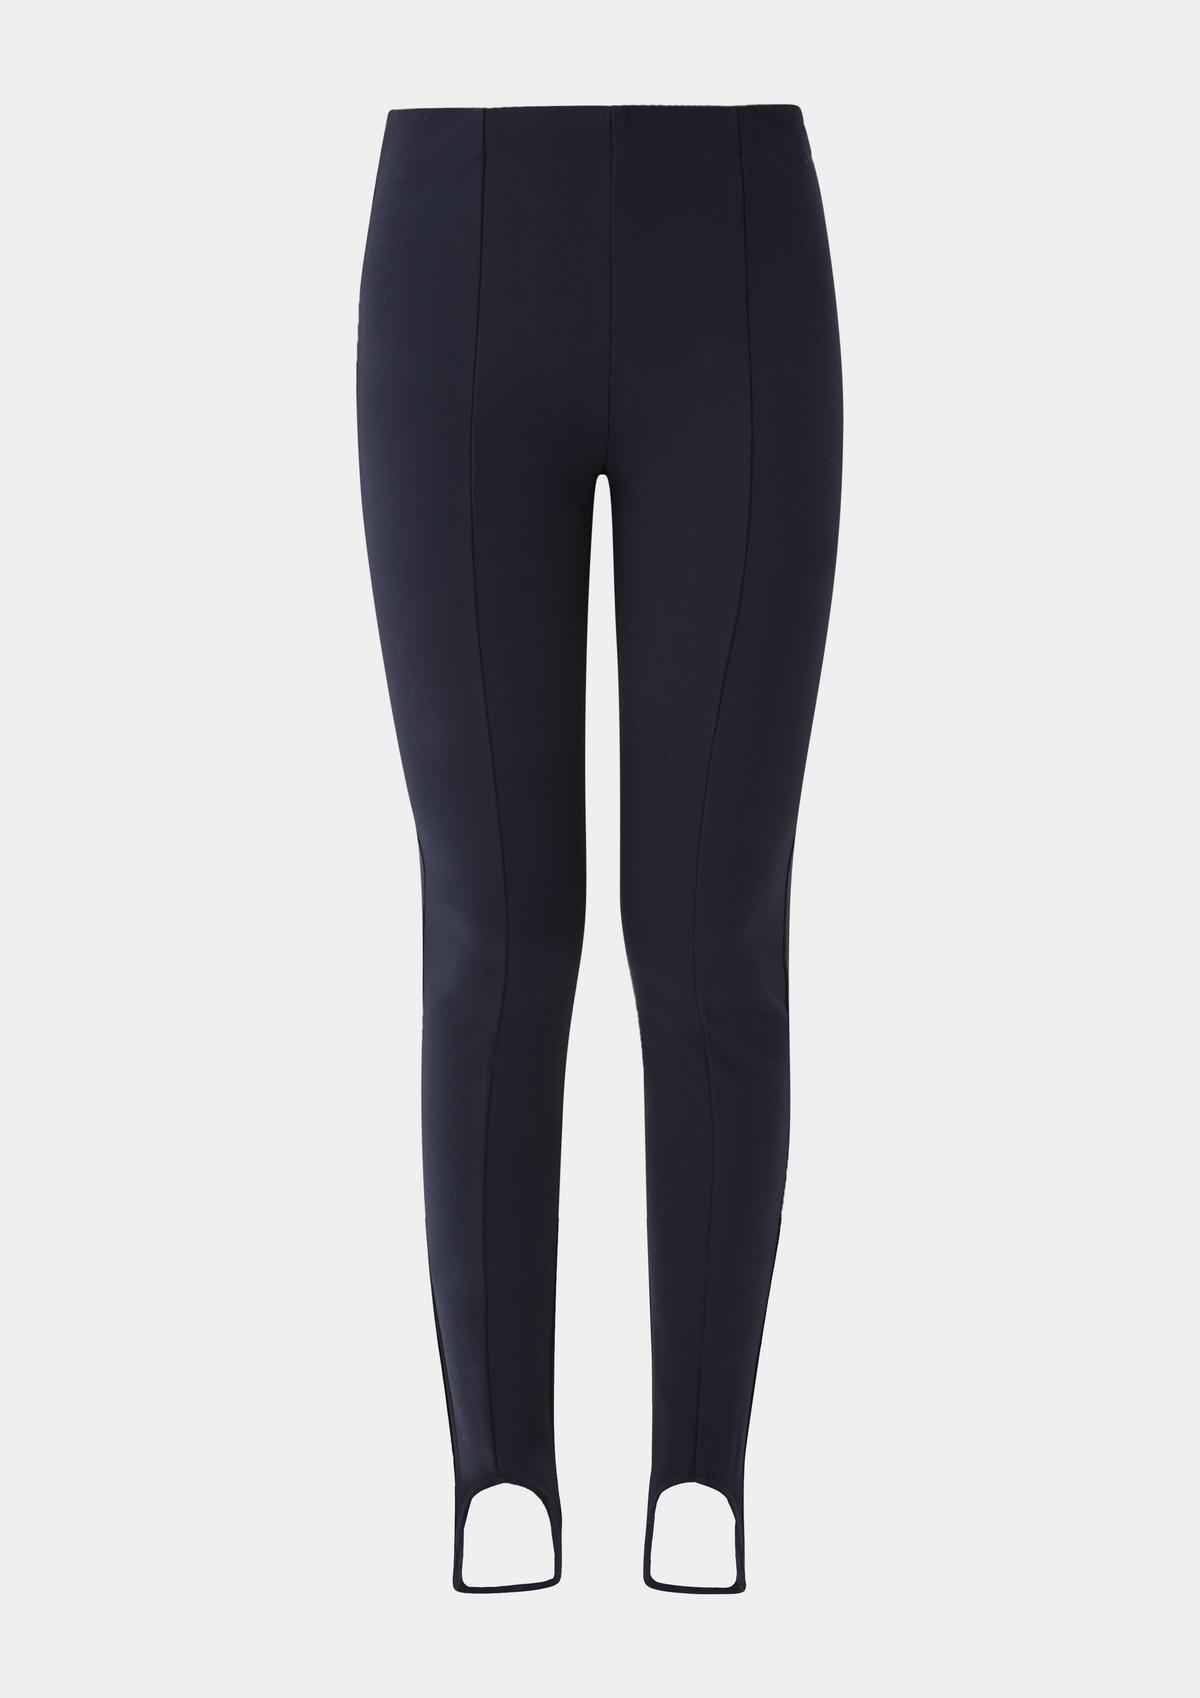 with Skinny - straps fit: foot leggings navy